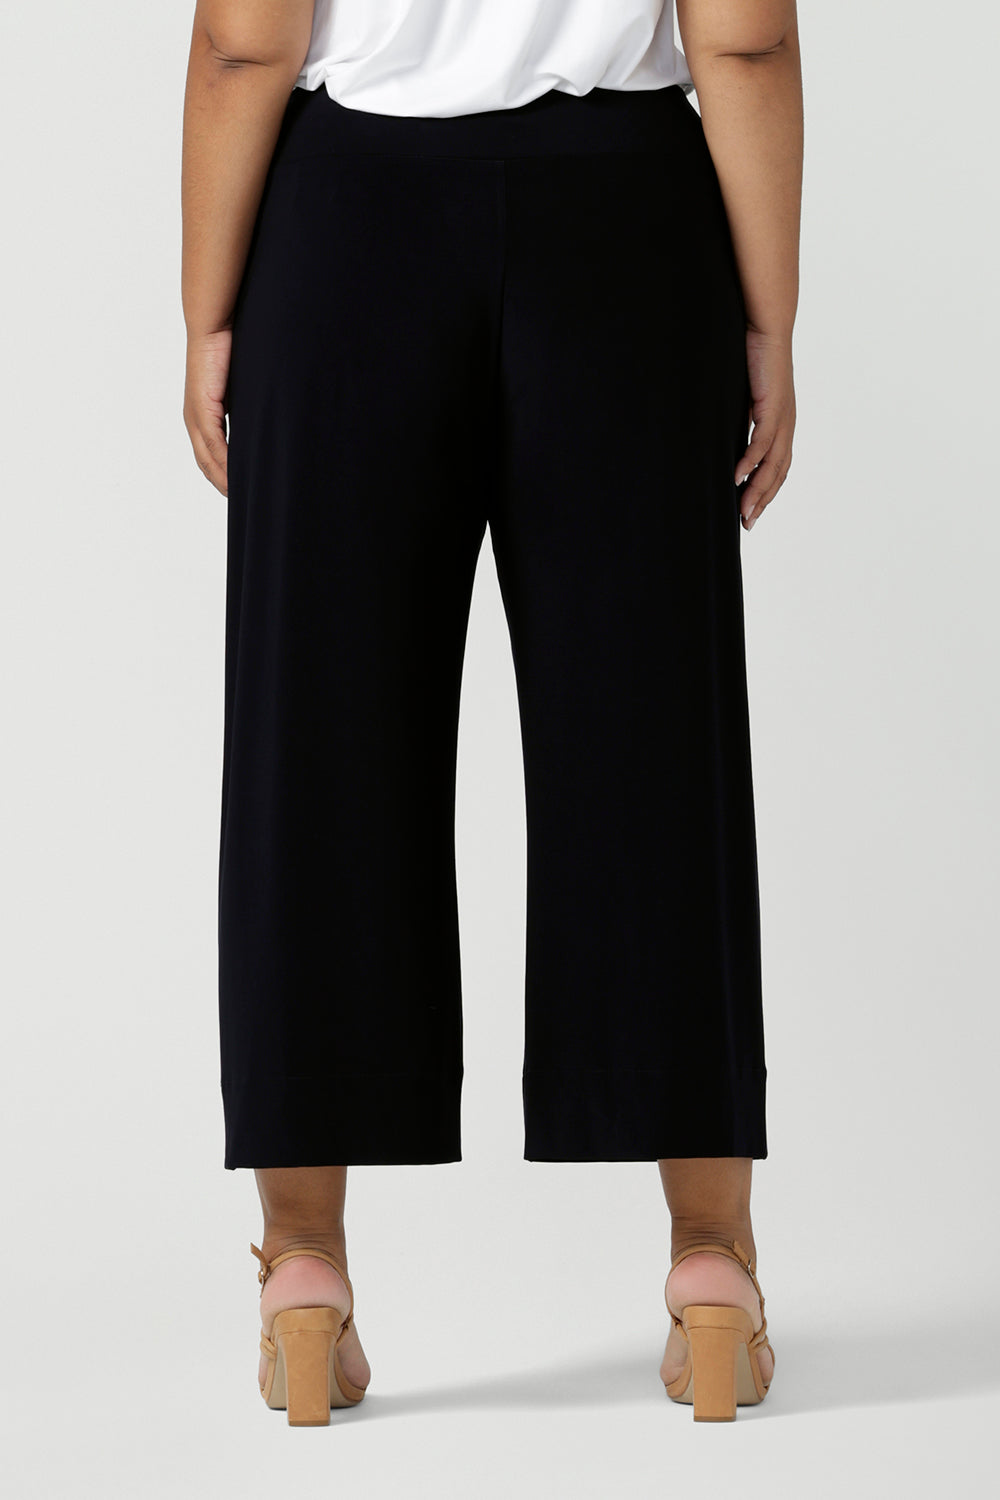 Back view of comfortable, wide leg navy culotte pants and a V-neck white bamboo jersey top with short sleeves are worn by a plus size, size 18 woman - shop online at Australian women's clothing brand, Leina & Fleur.